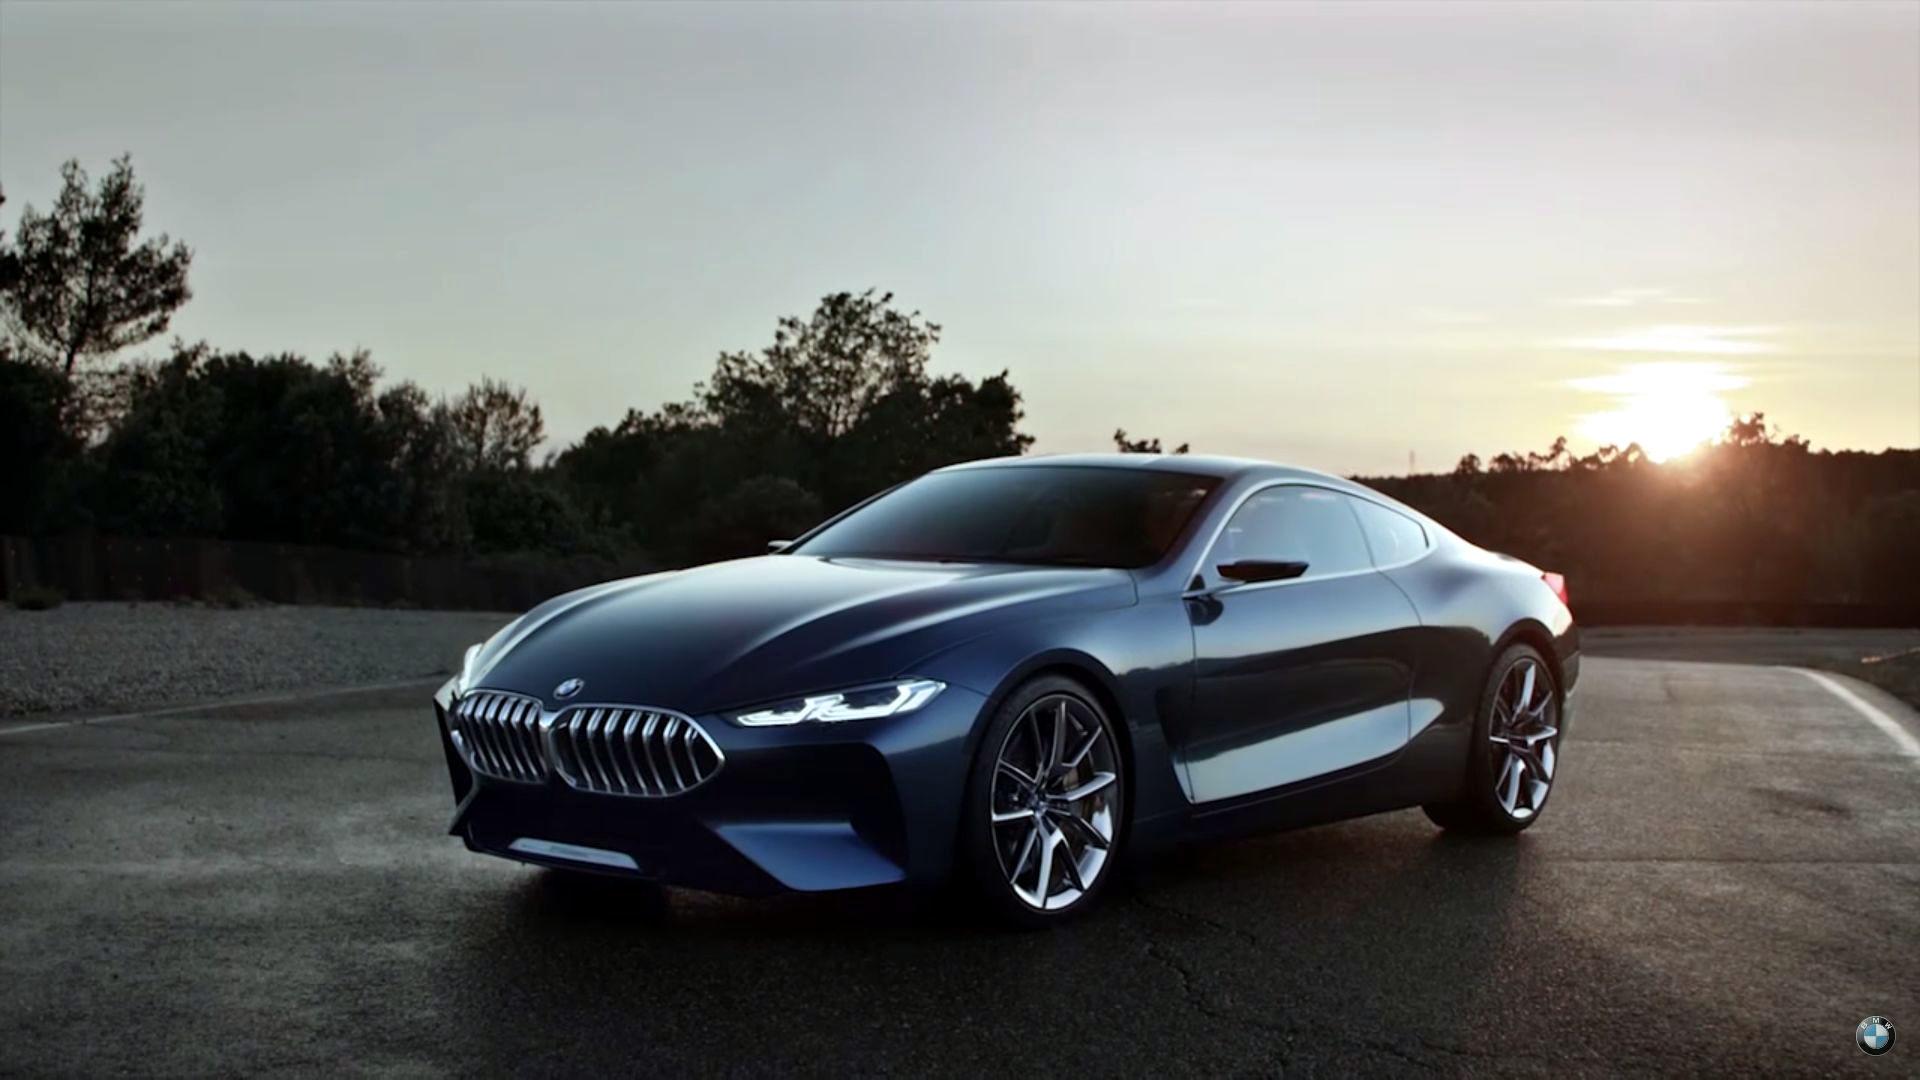 People Are Shocked To See BMW 8 Series Concept In New Promo